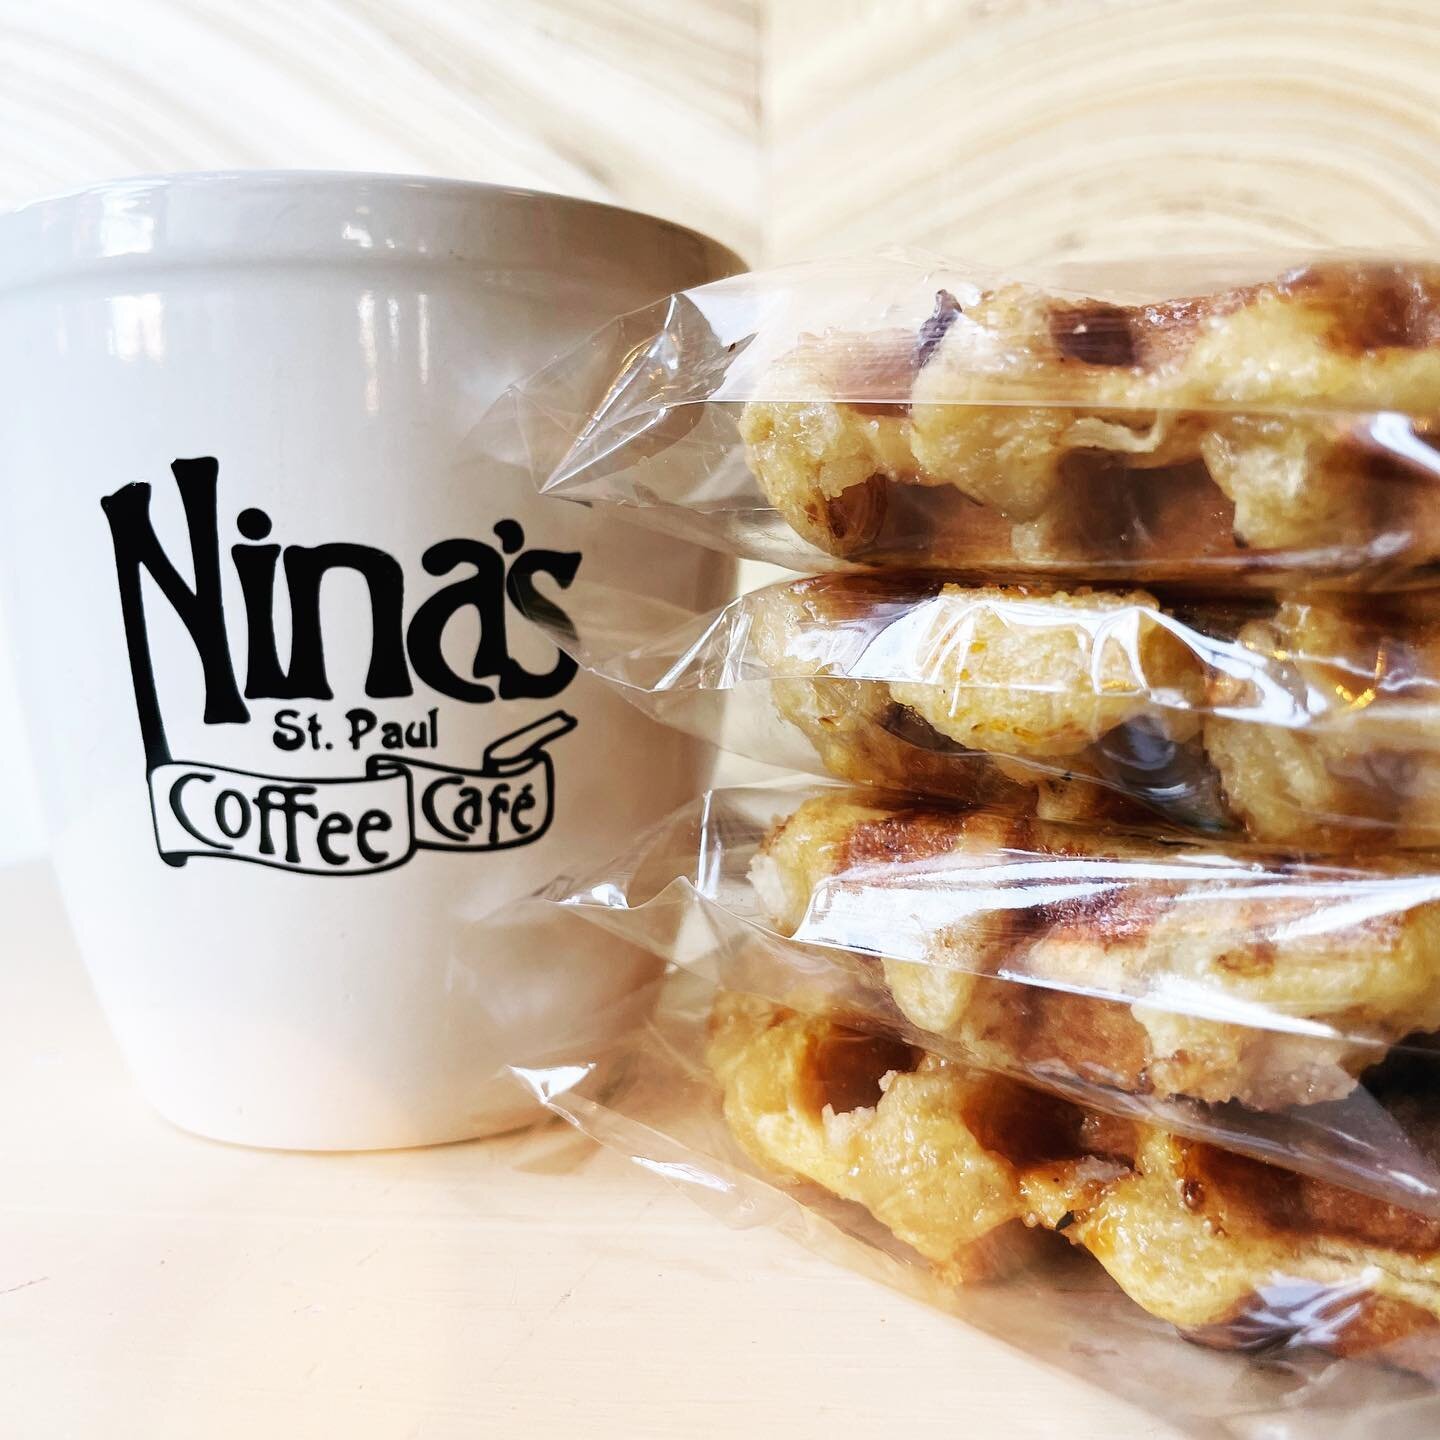 Coffee and waffles. Our favorite. Head to Nina&rsquo;s this weekend for a little self-love moment.